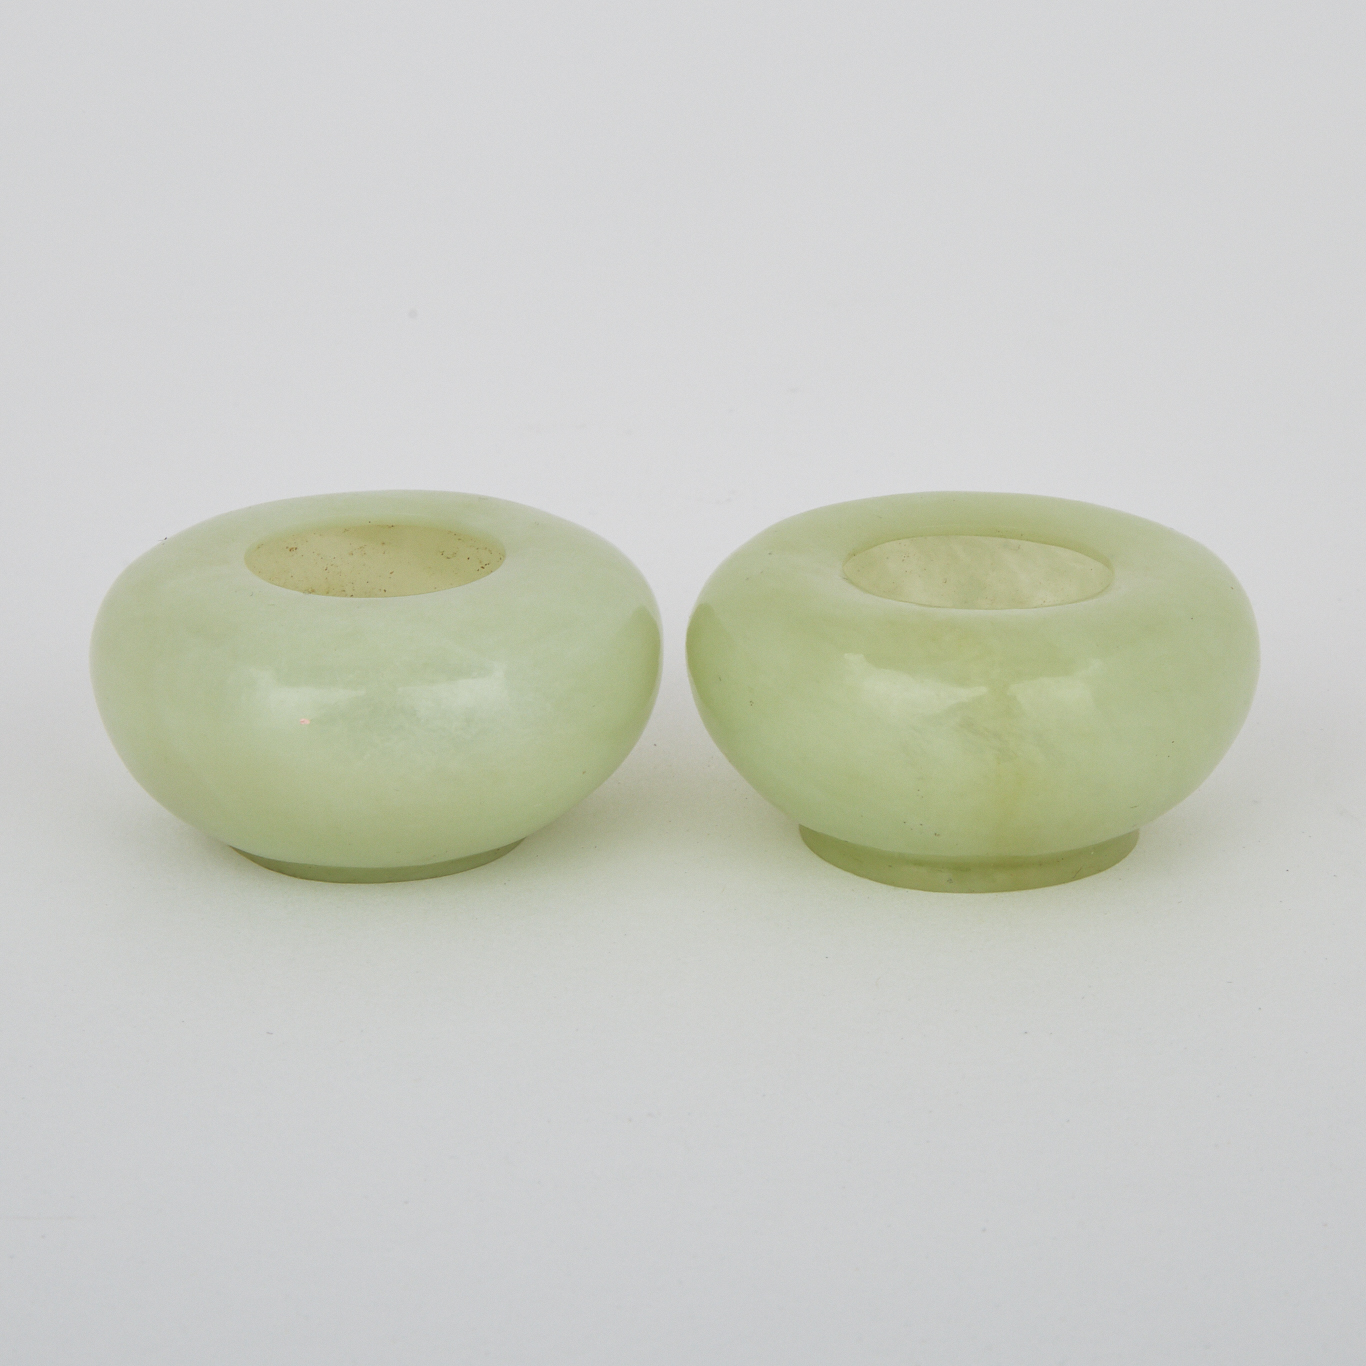 A Pair of Hardstone Carved Miniature Basins